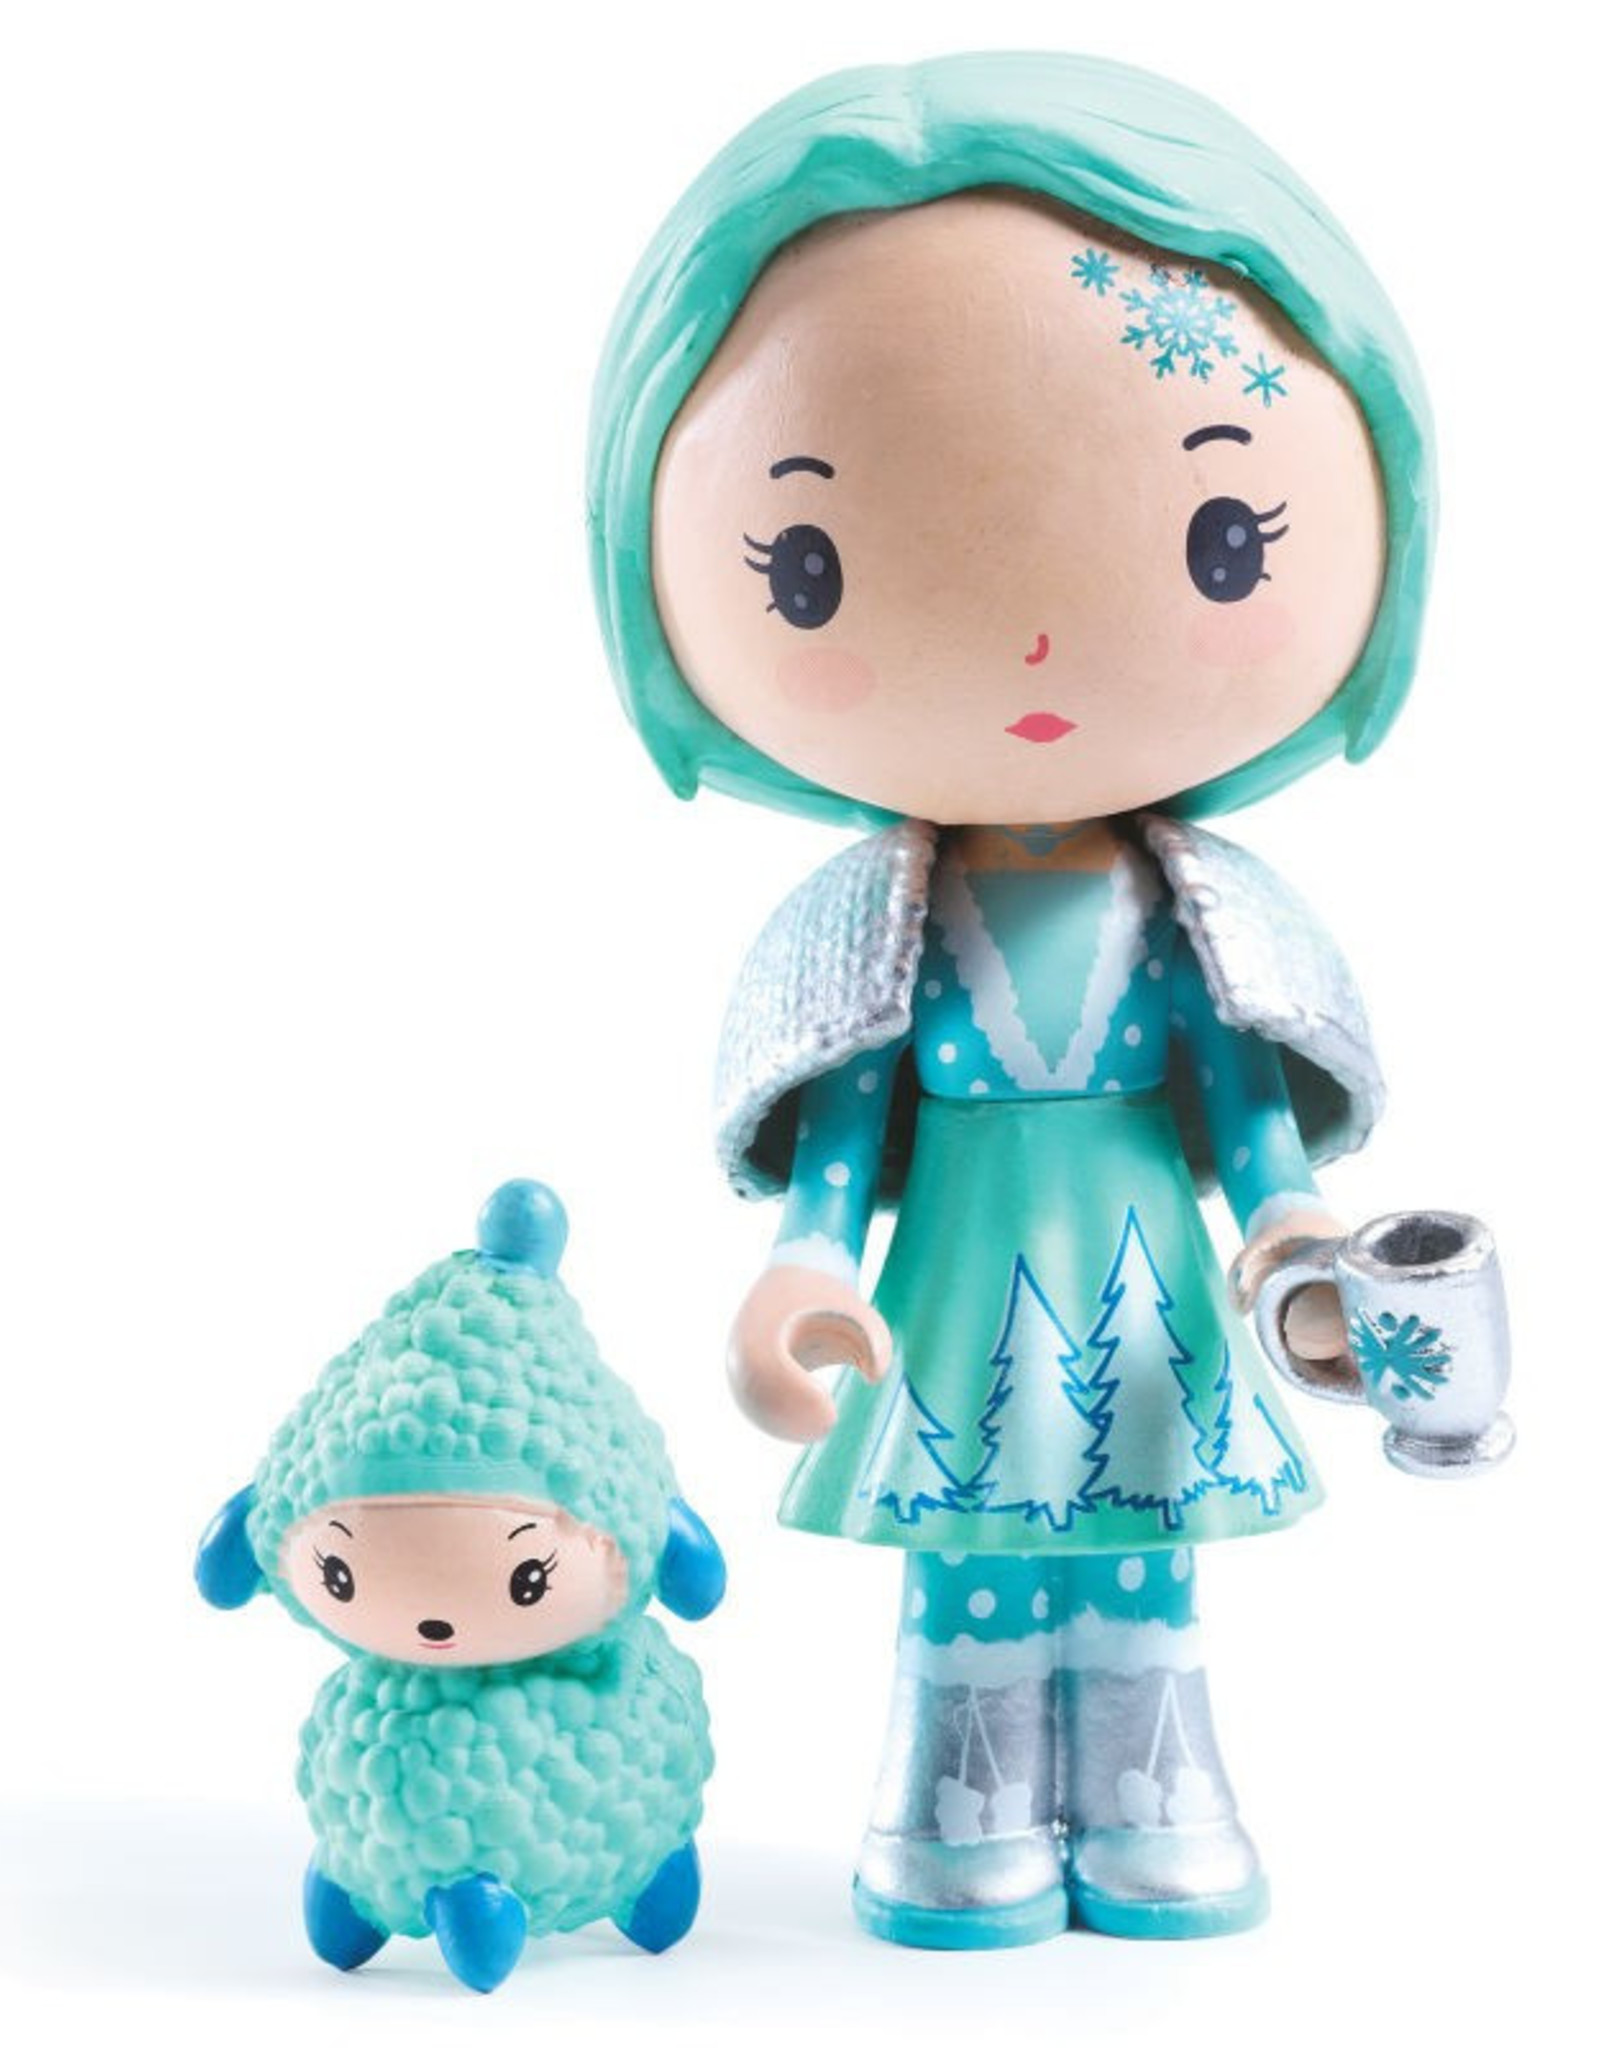 Djeco Cristale and Frizz - Tinyly figurines